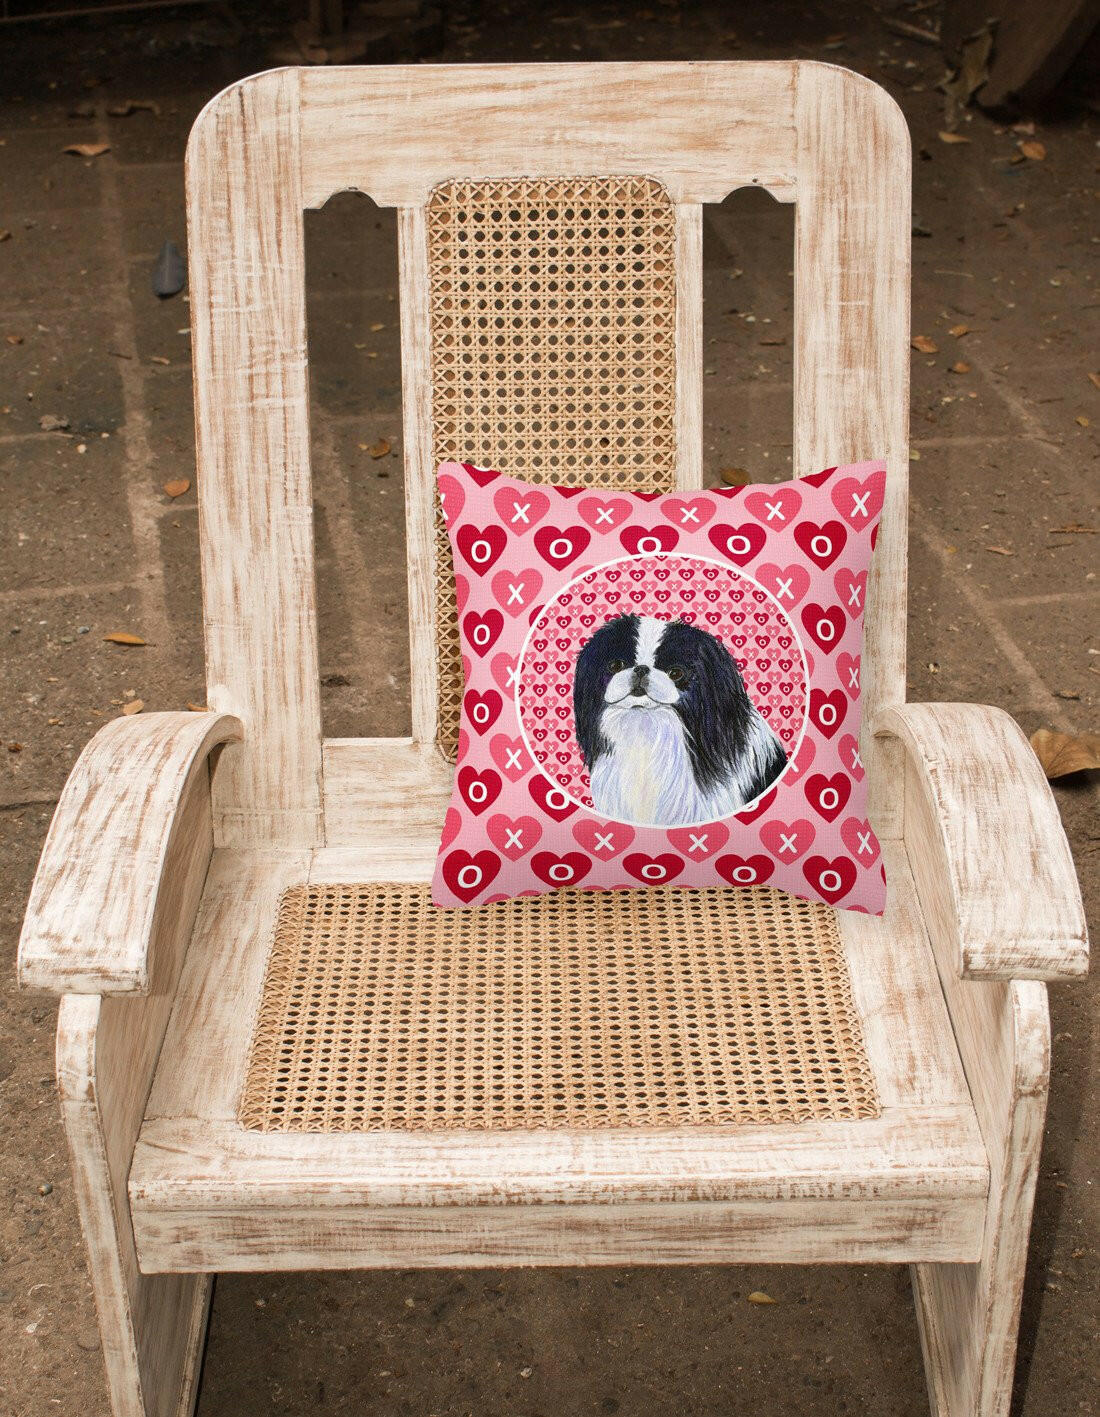 Japanese Chin Hearts Love and Valentine's Day Portrait Fabric Decorative Pillow SS4467PW1414 by Caroline's Treasures